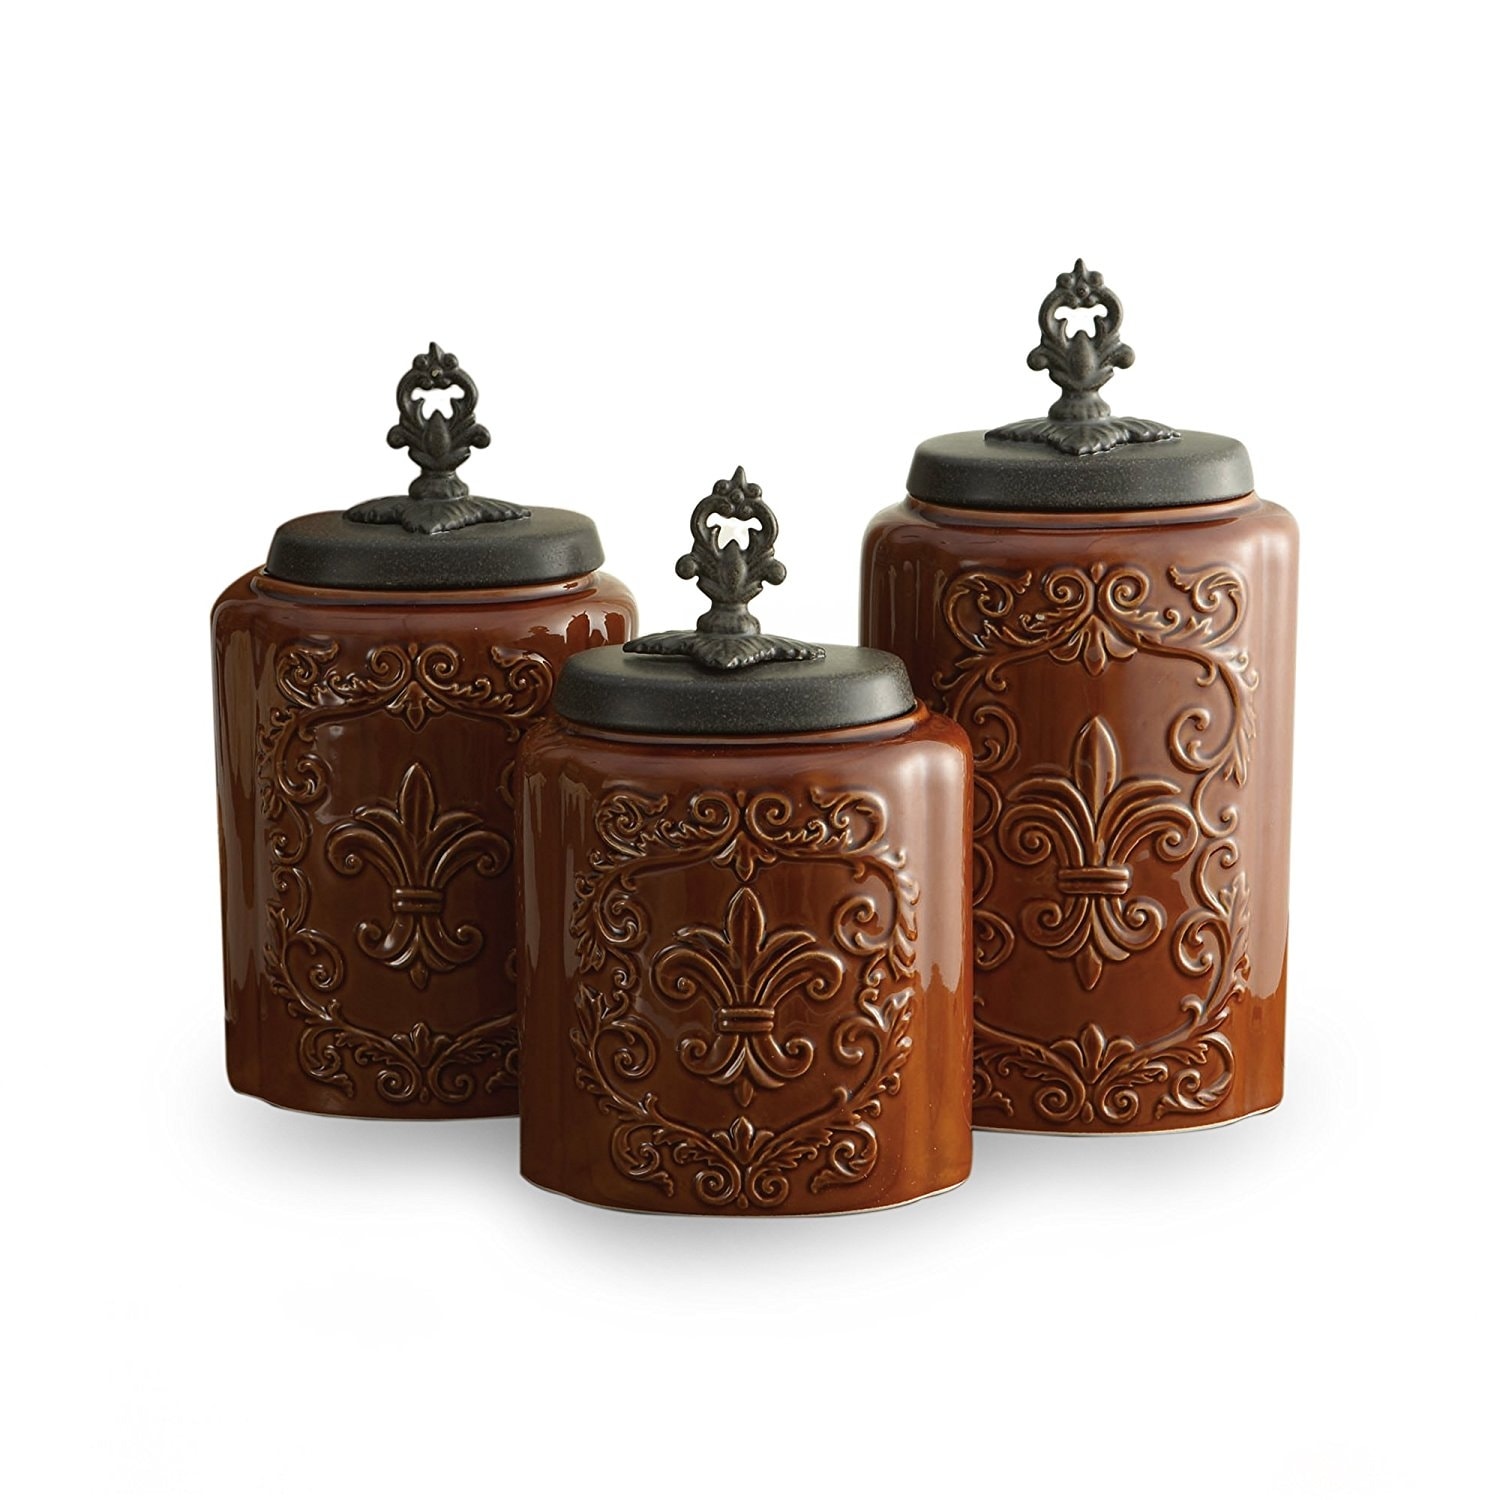 https://ak1.ostkcdn.com/images/products/is/images/direct/54195aa8c0d82ad02ee92f092f73fa33fc43479d/American-Atelier-Antique-Collection-Fleur-de-Lis-Brown-Canisters-Kitchen-Storage%2C-Set-of-3.jpg